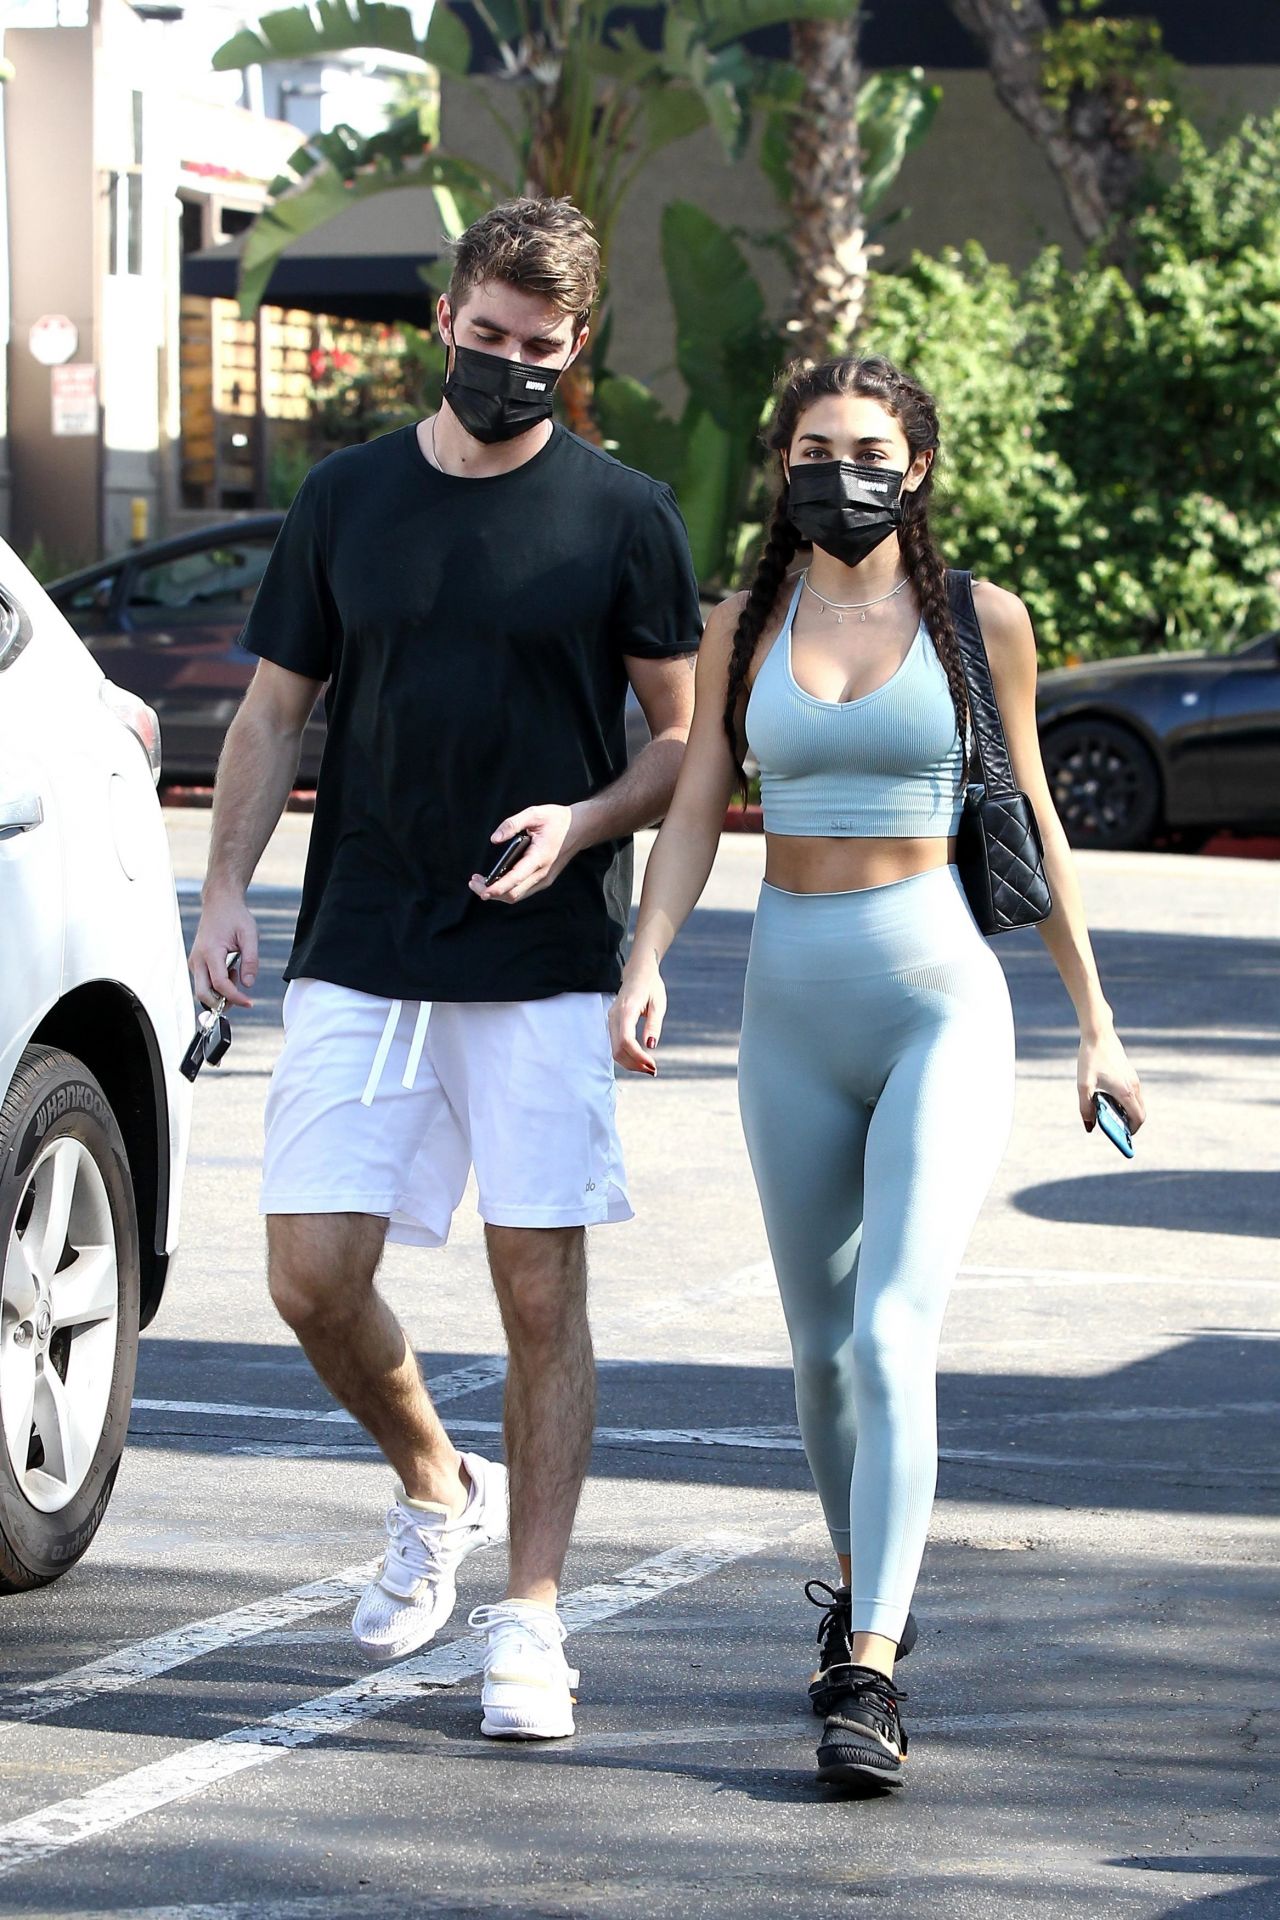 https://celebmafia.com/wp-content/uploads/2020/11/chantel-jeffries-and-andrew-taggart-out-in-la-11-18-2020-2.jpg